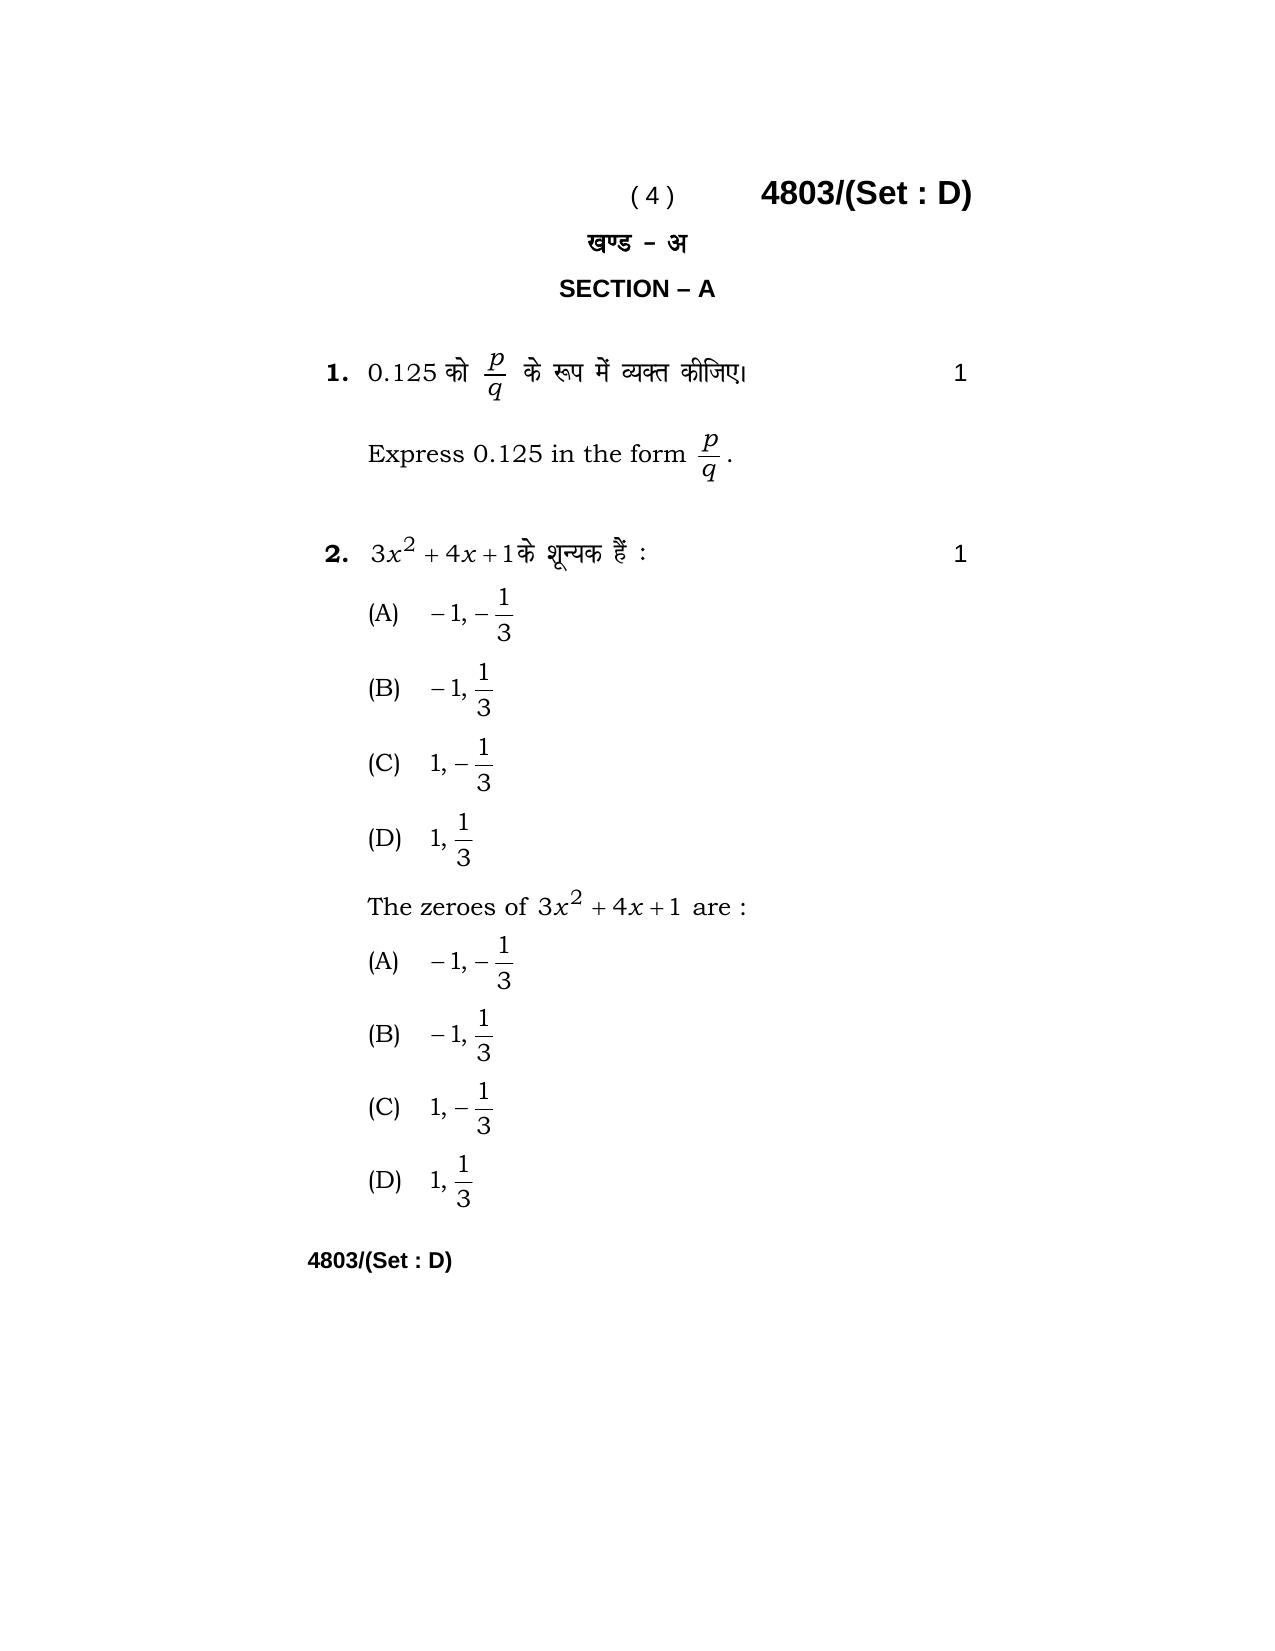 Haryana Board HBSE Class 10 Mathematics 2020 Question Paper - Page 52